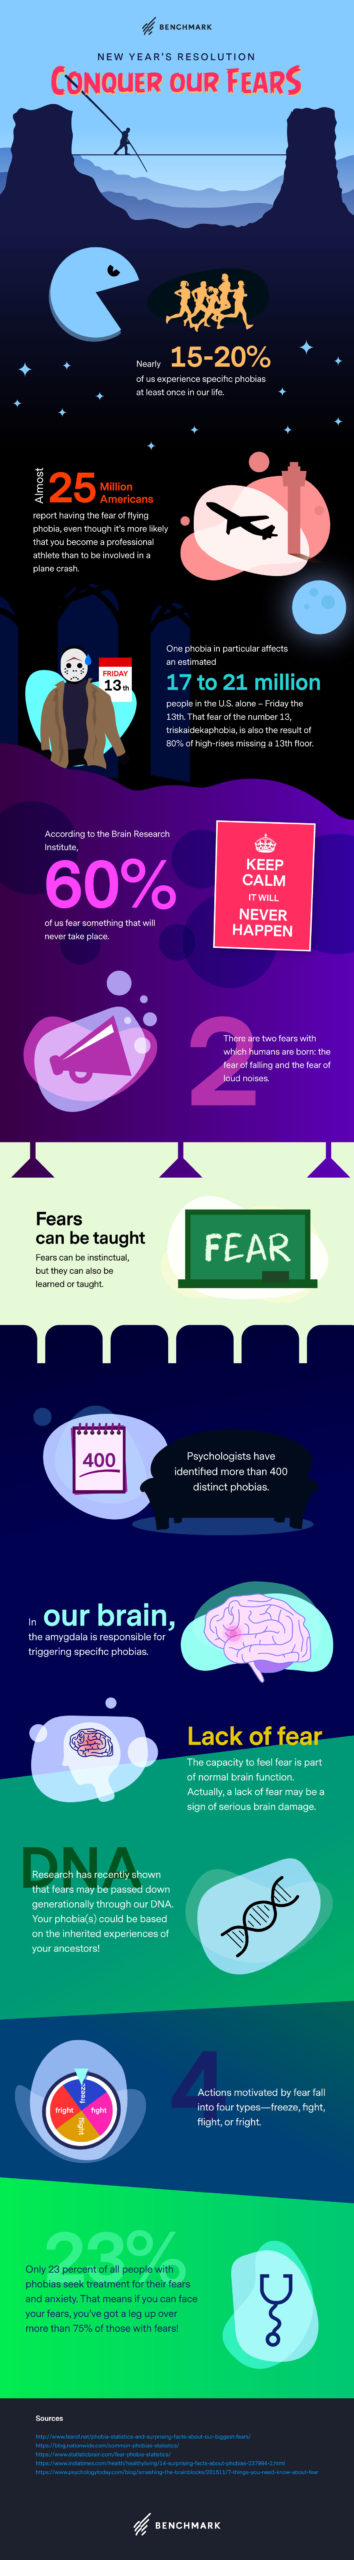 New Year’s Resolution: Conquering Our Fears